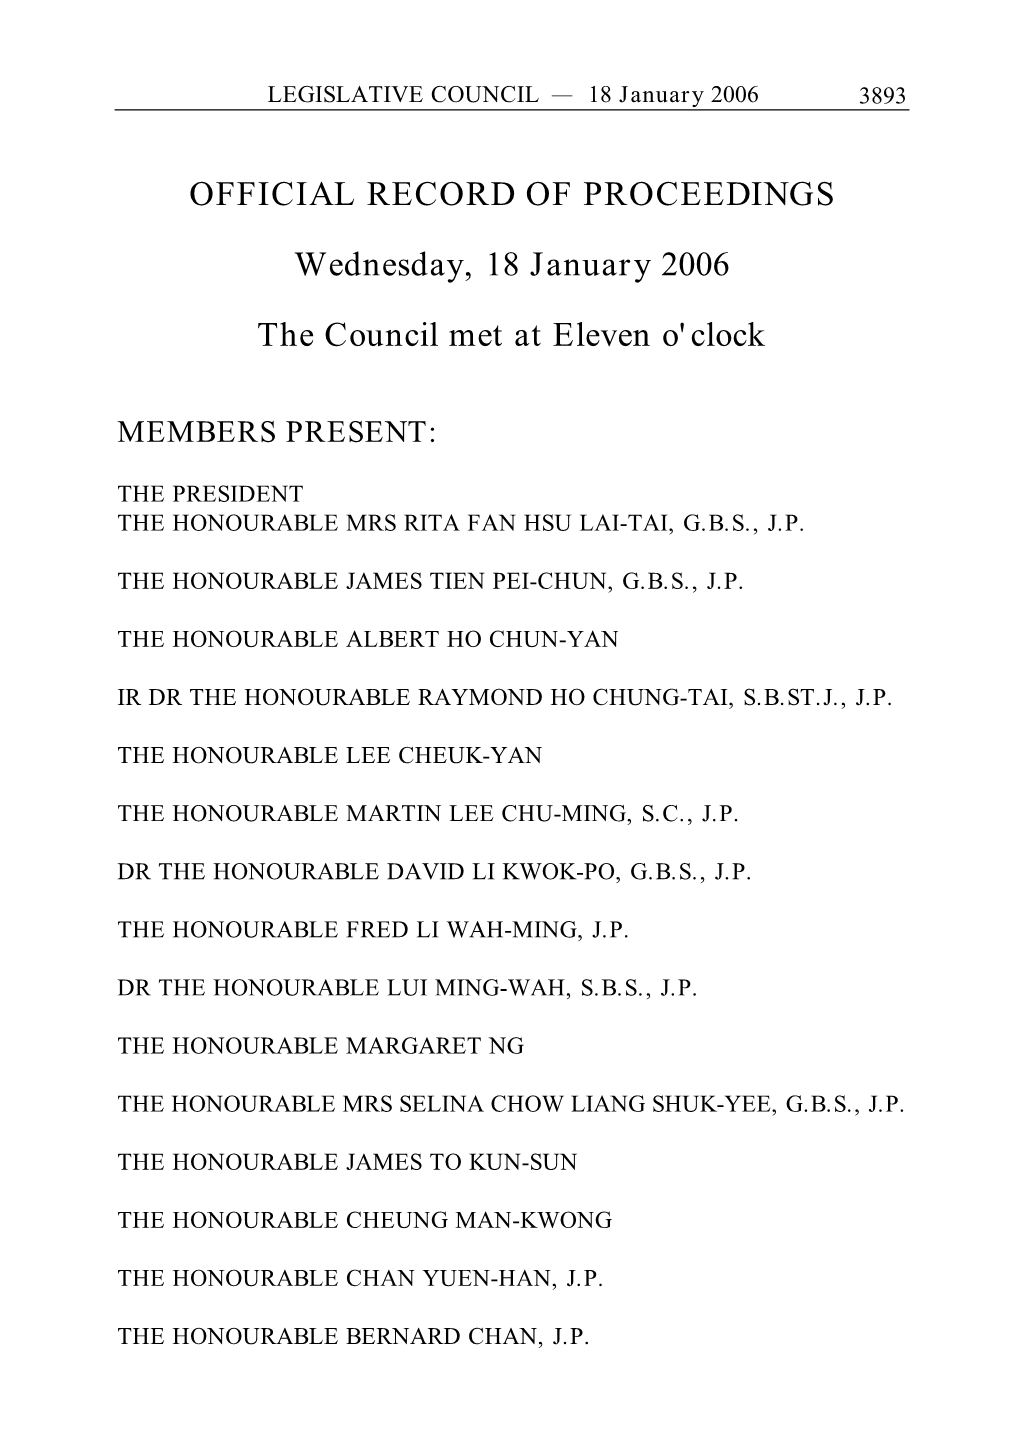 OFFICIAL RECORD of PROCEEDINGS Wednesday, 18 January 2006 the Council Met at Eleven O'clock